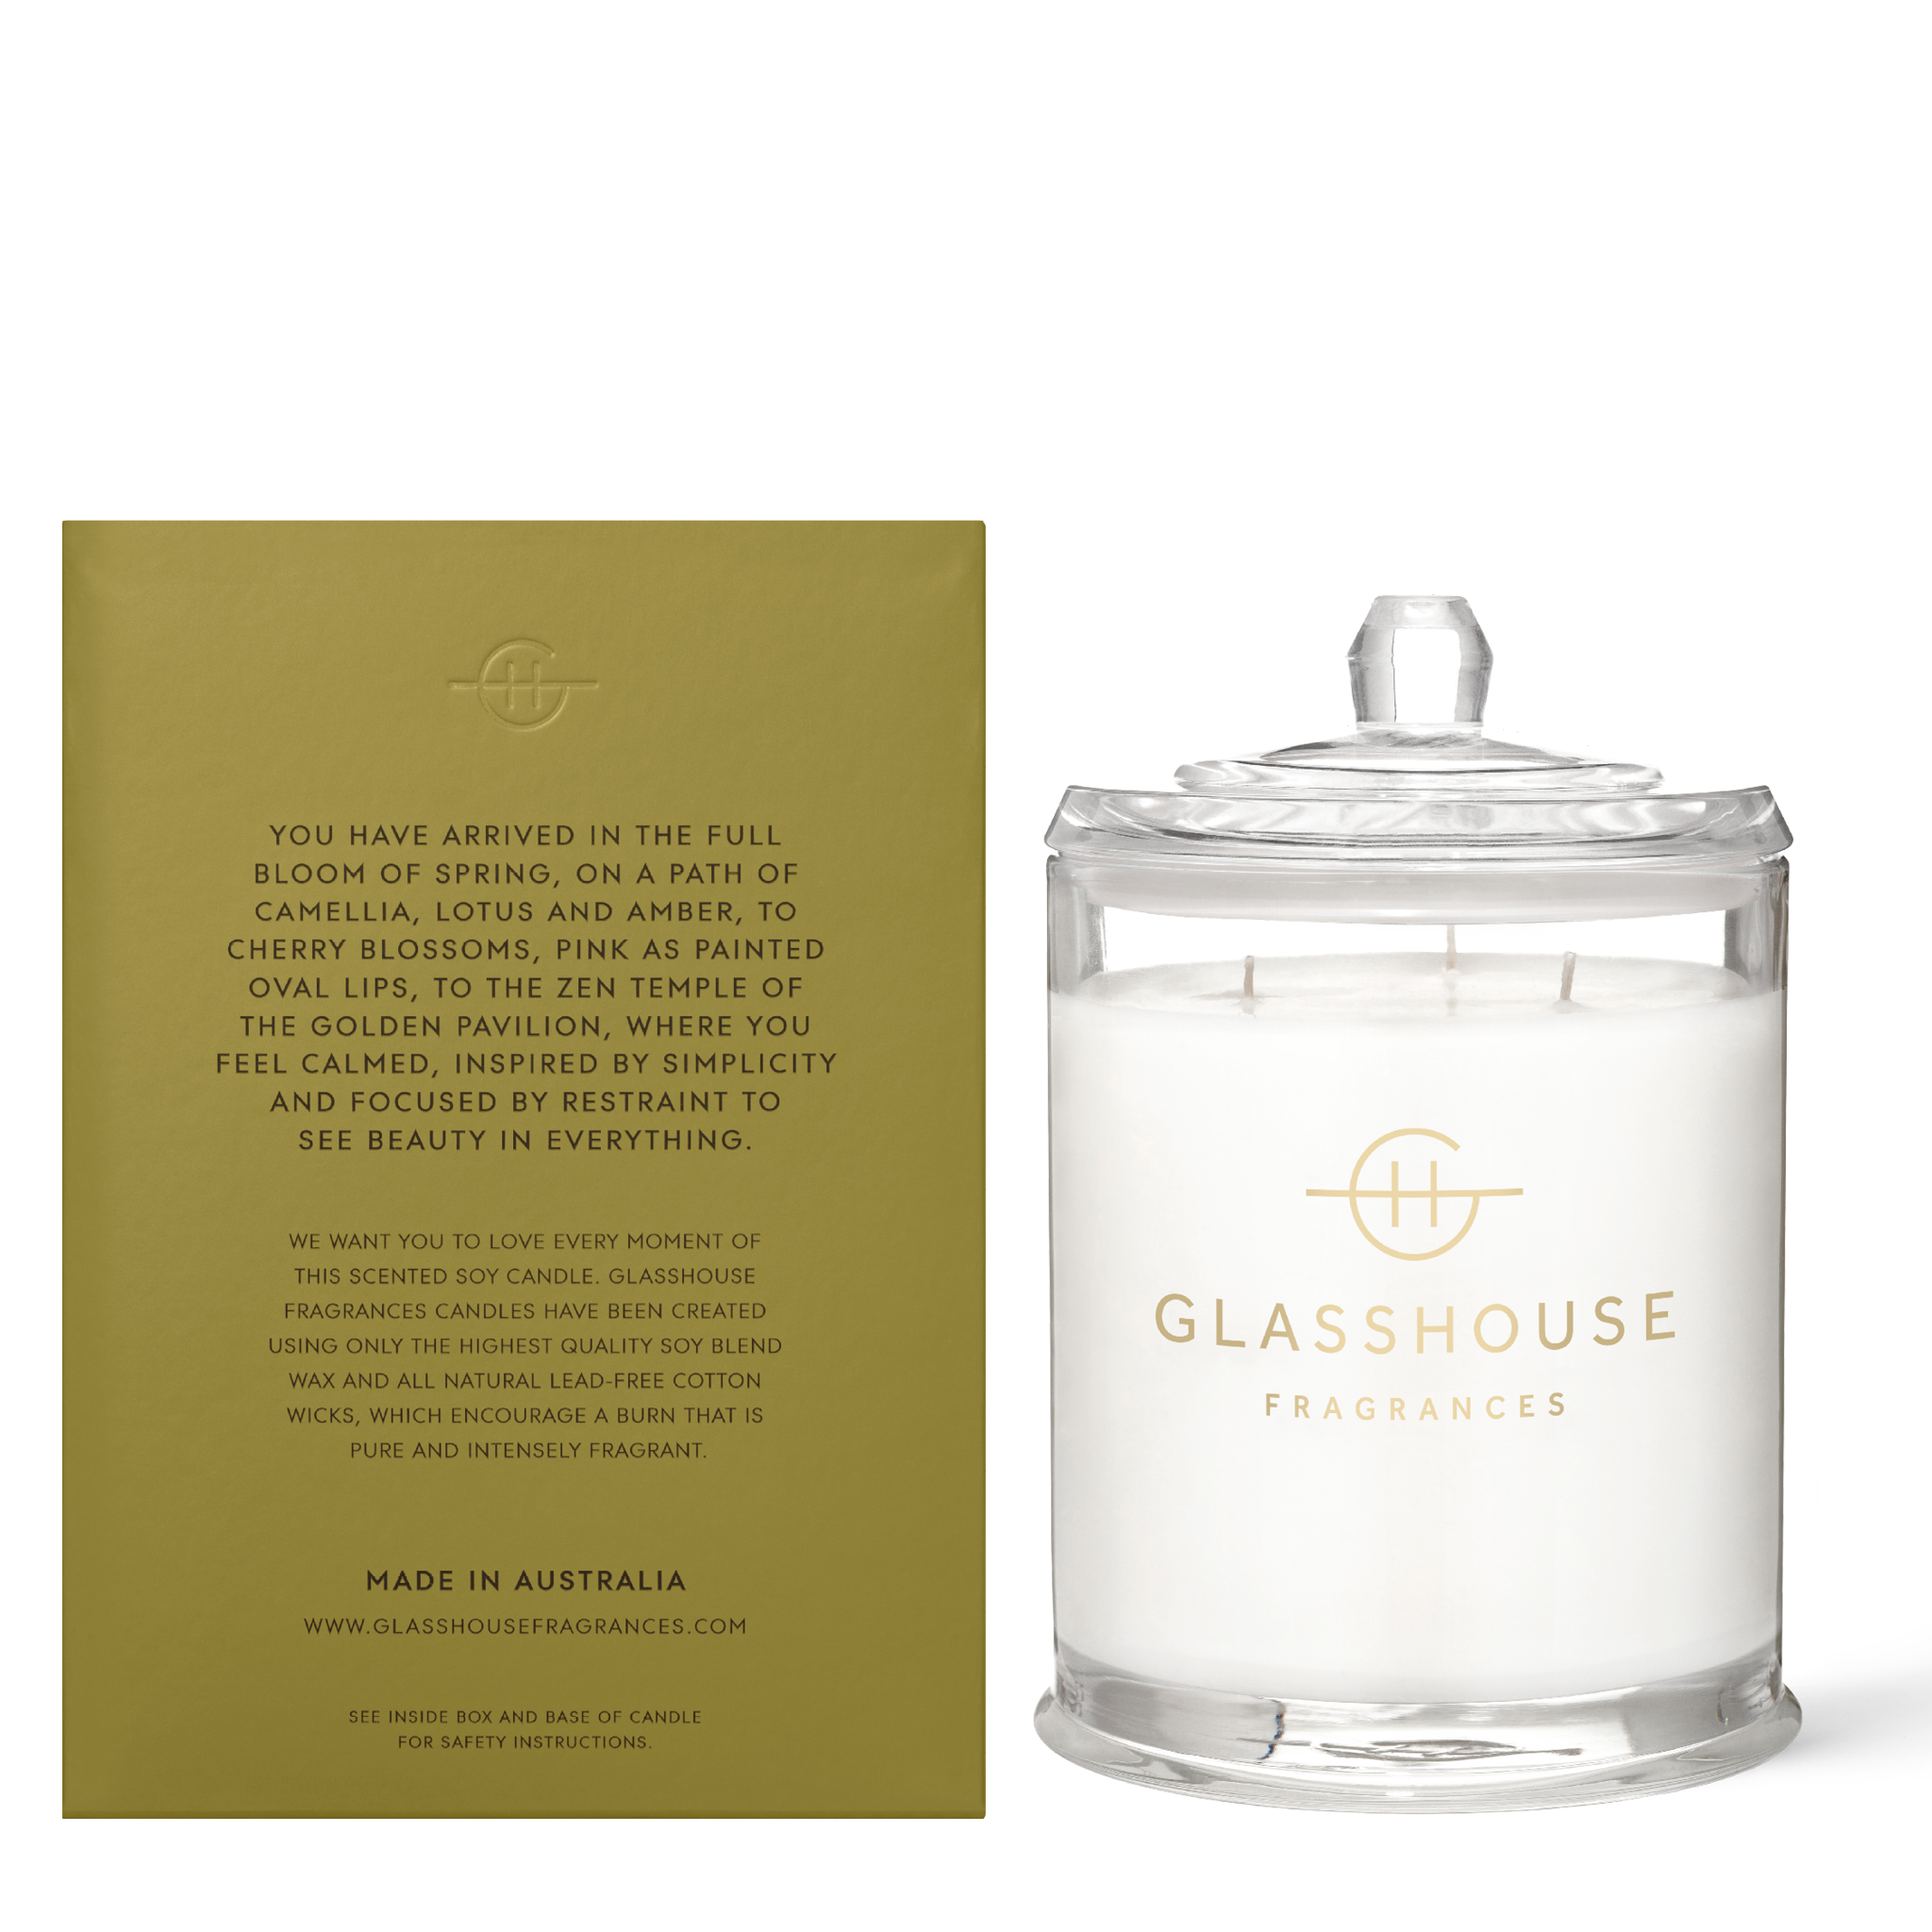 Glasshouse Fragrances Kyoto in Bloom Camellia and Lotus 760g Soy Candle with box - back of product shot